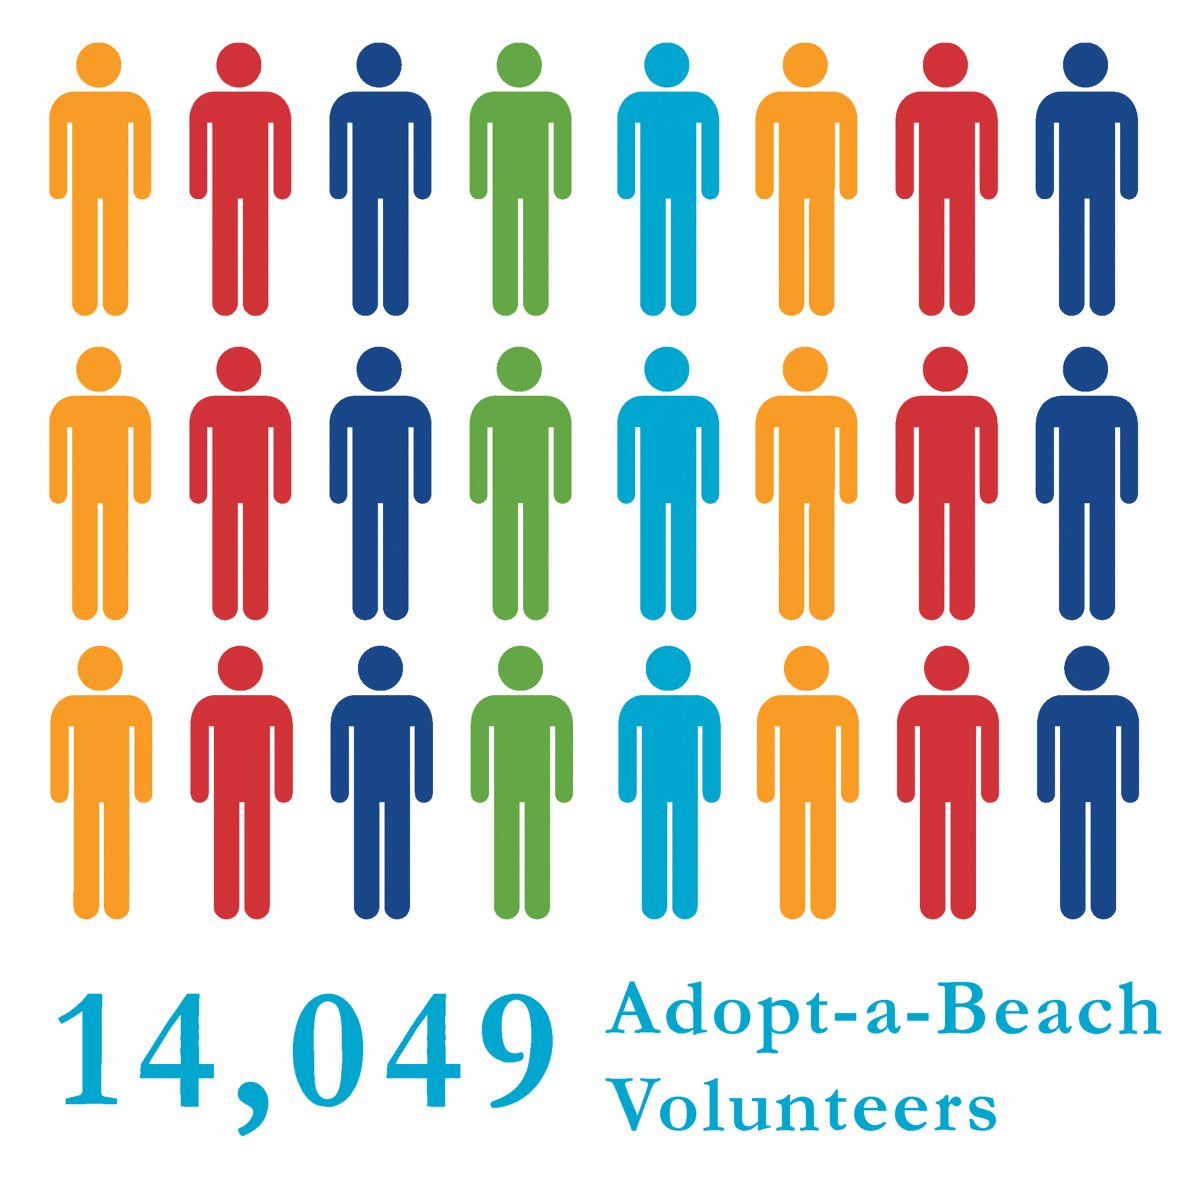 14,049 people volunteered with Adopt-a-Beach in 2017